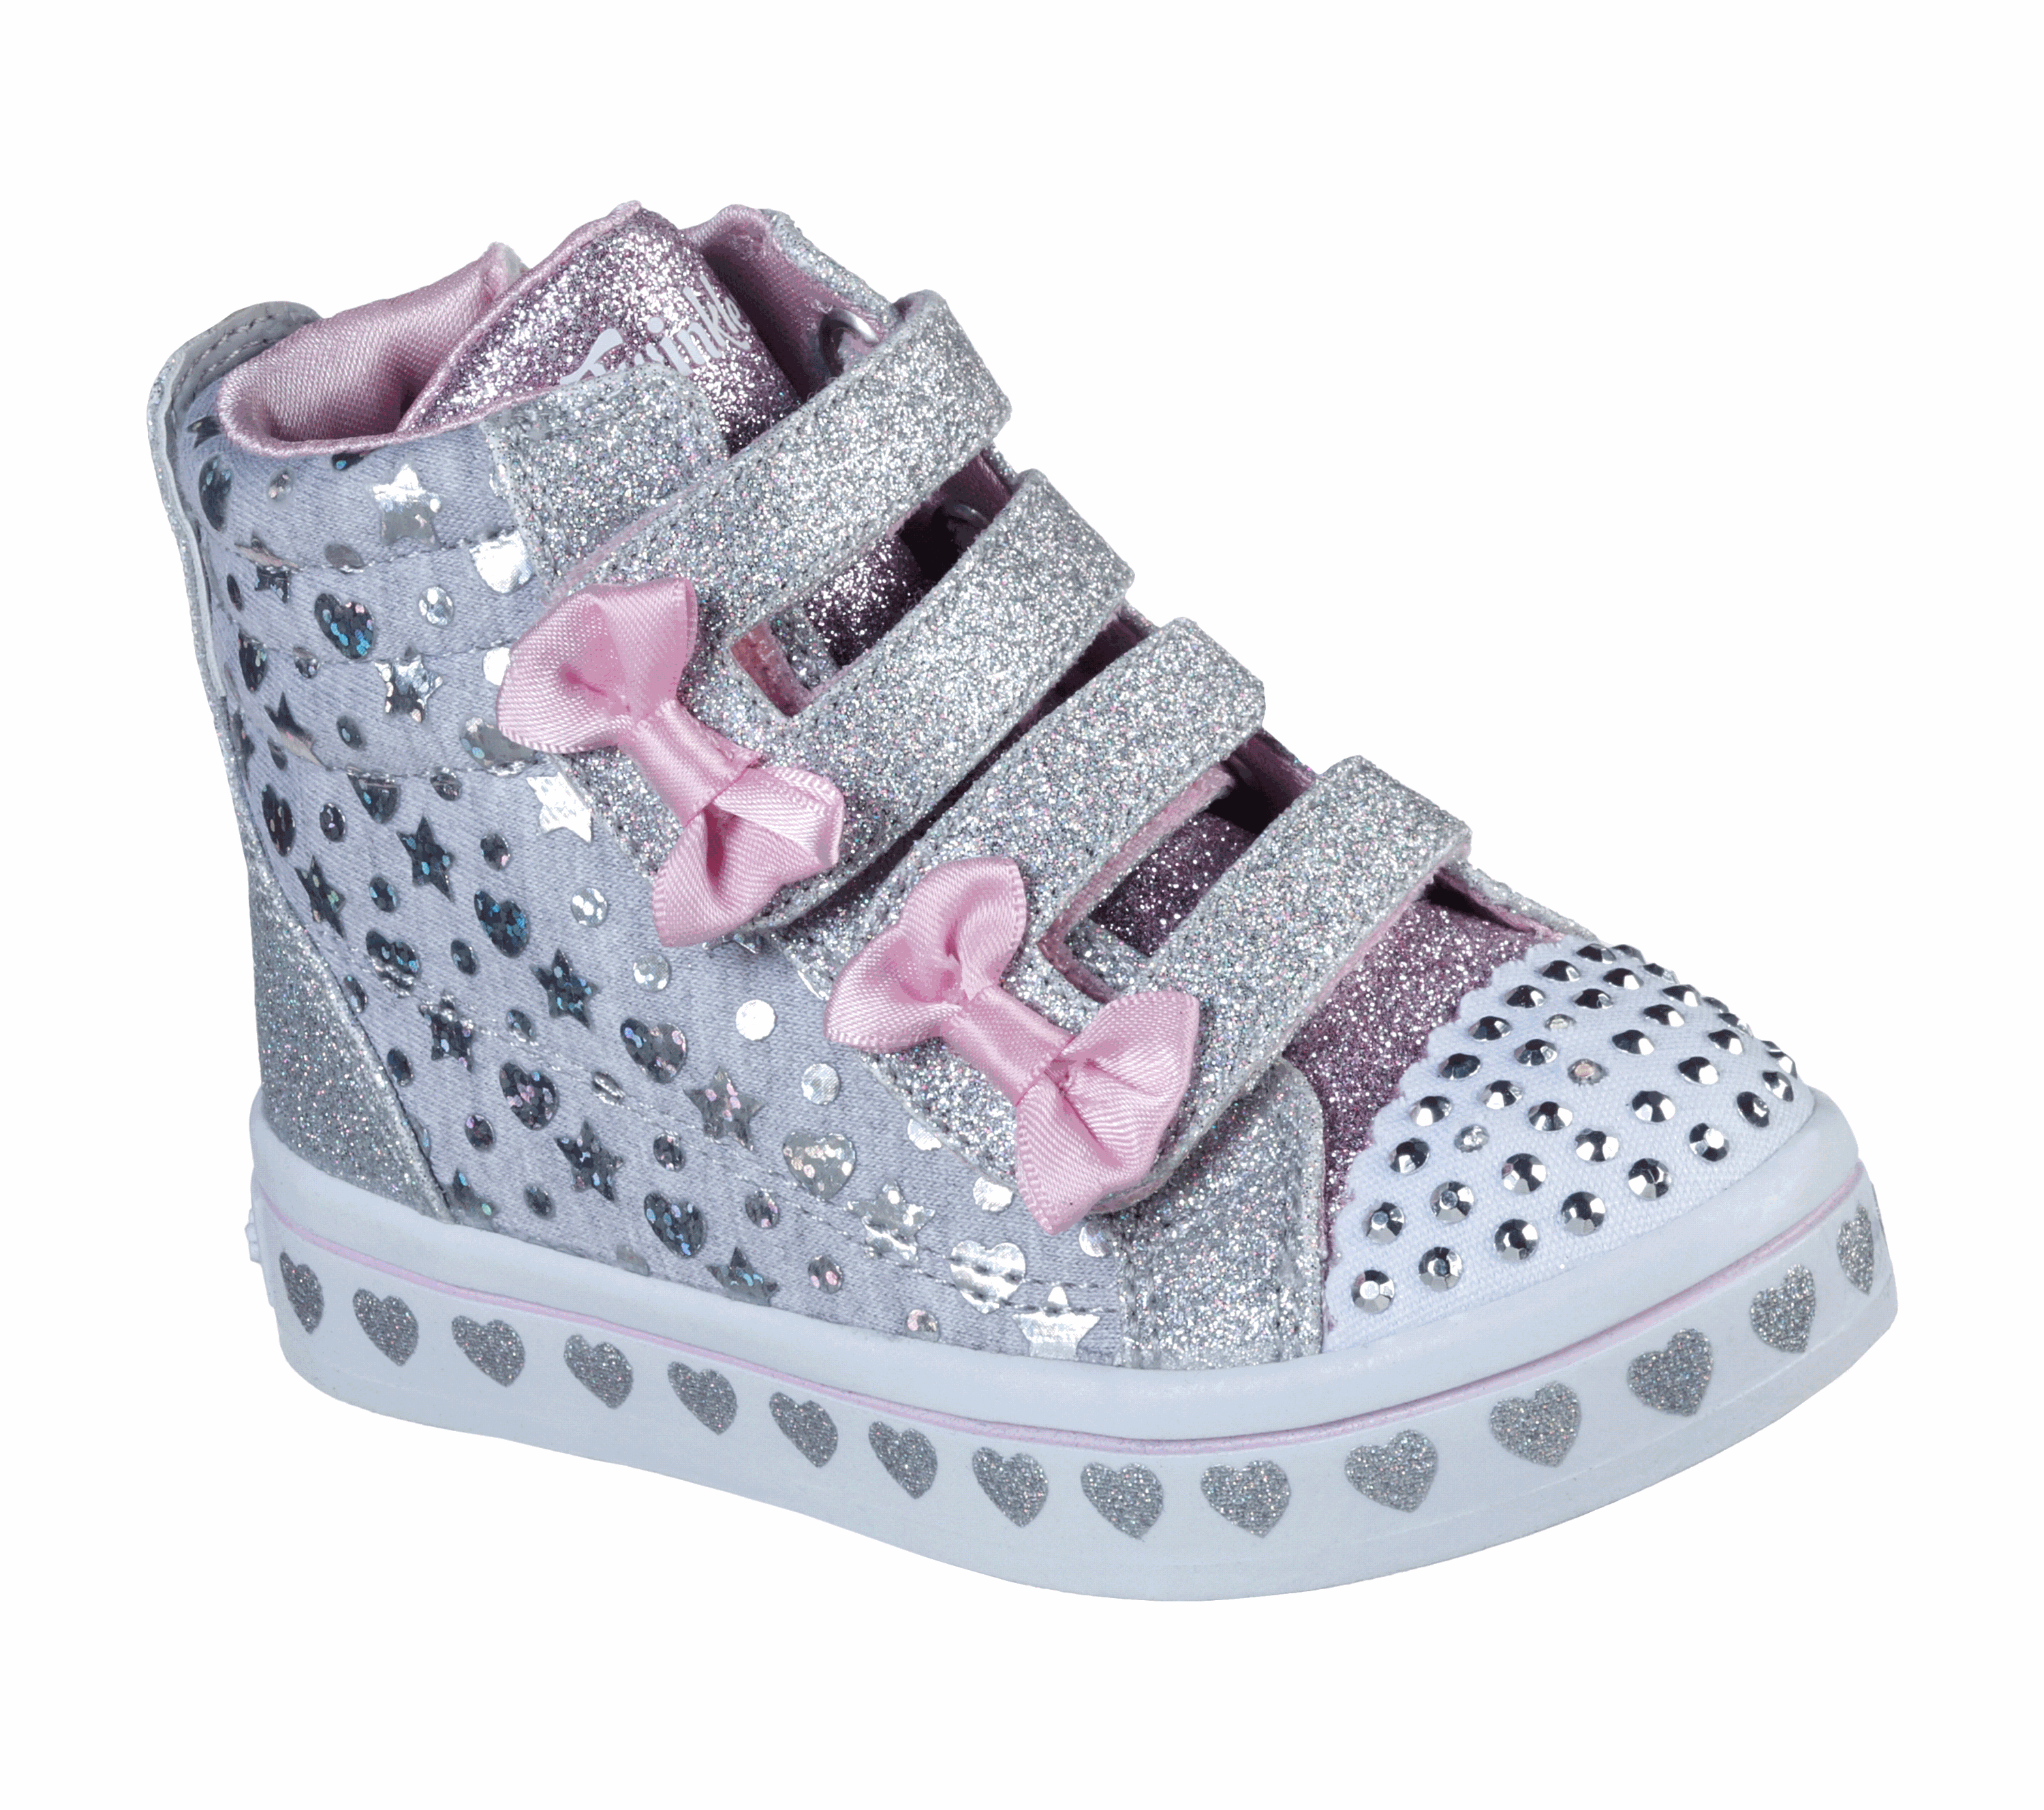 skechers twinkle toes toddler size 10